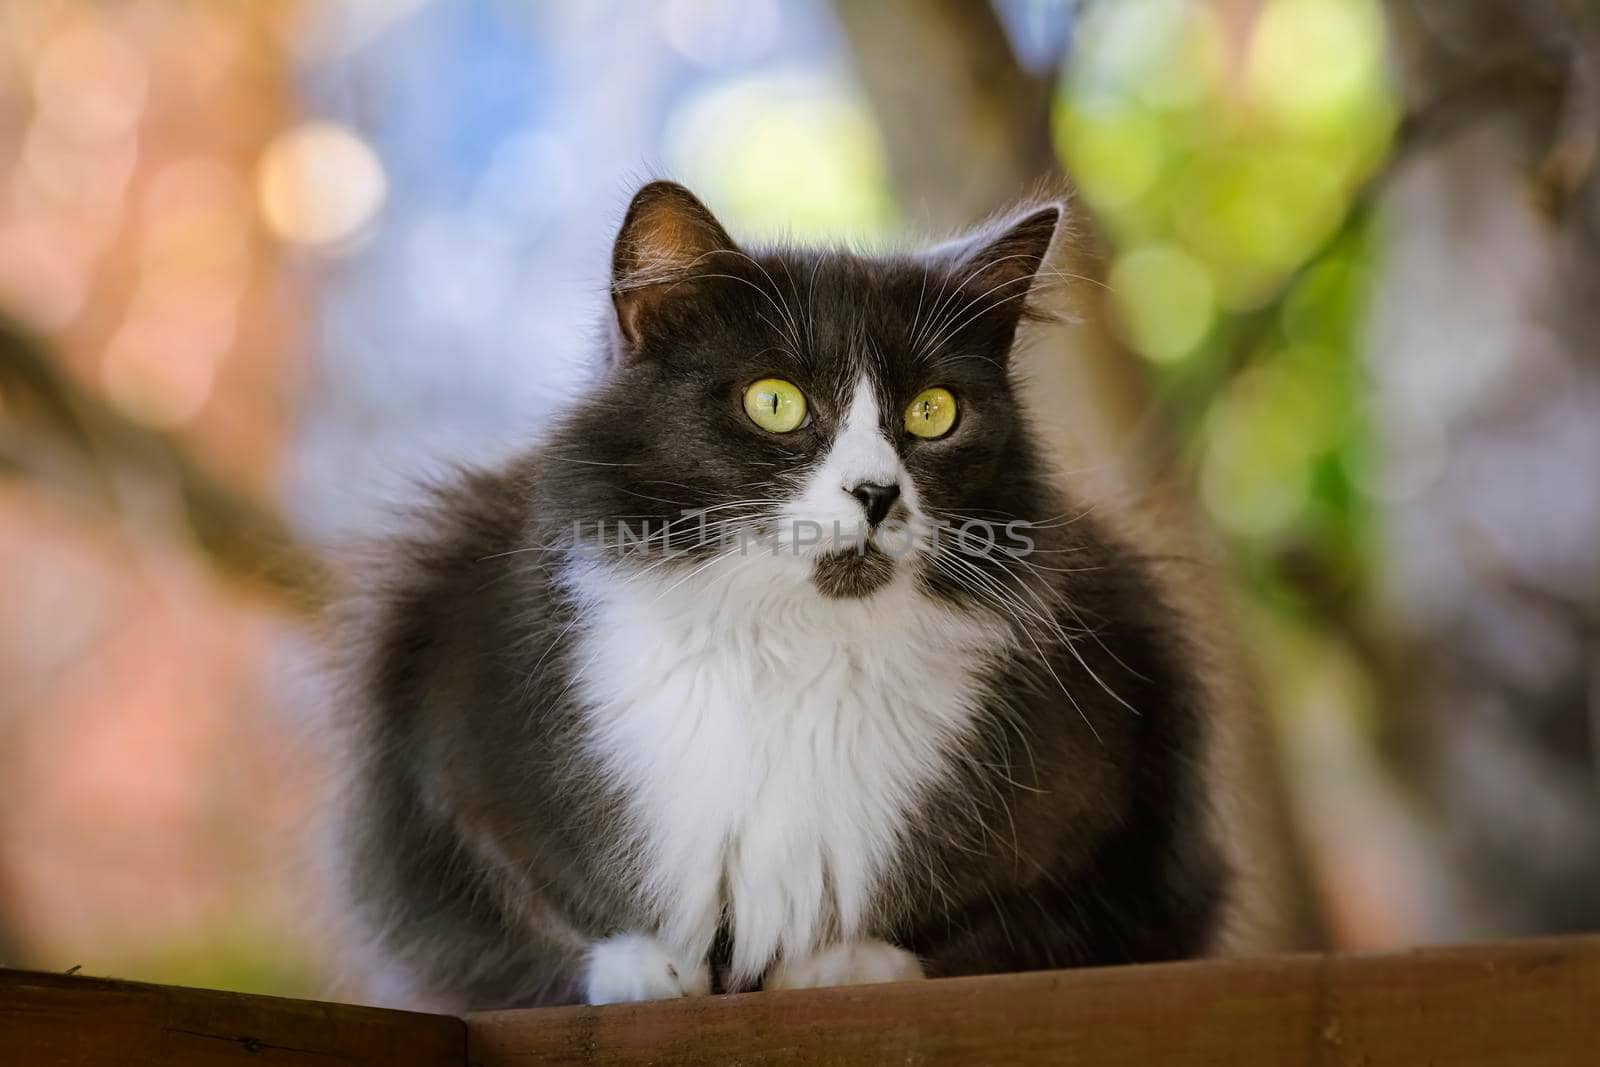 Outdoor portrait of lack and white cat